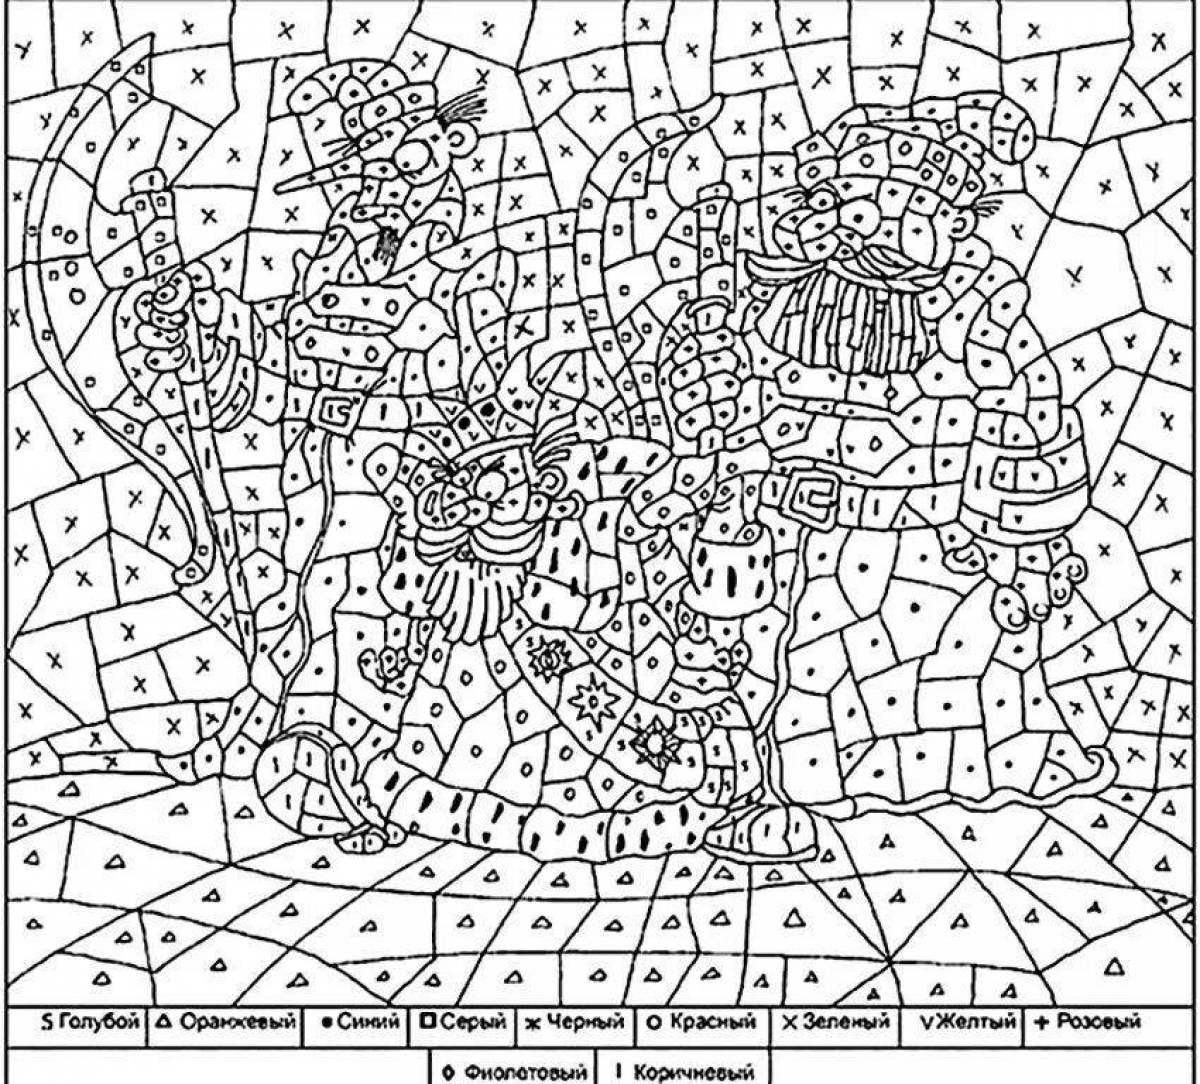 Colour explosion coloring page